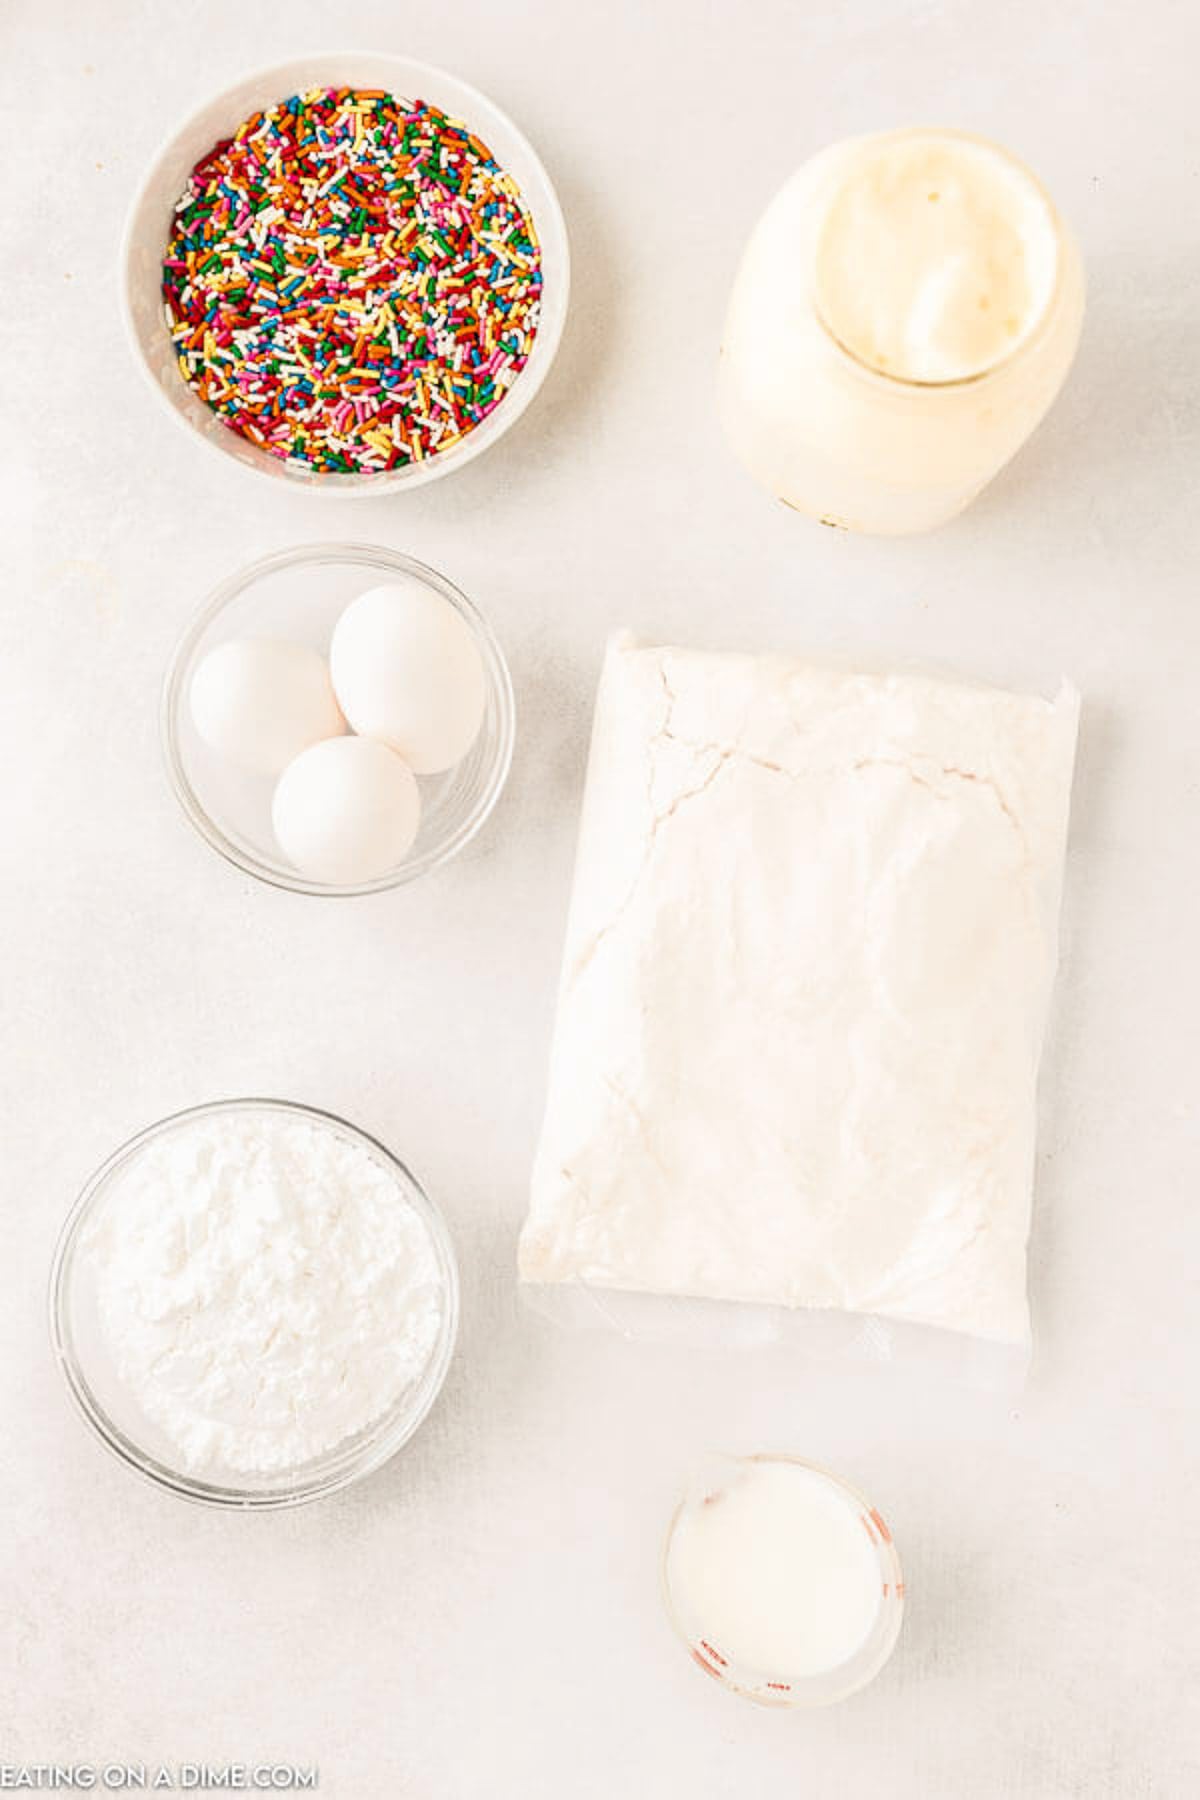 Ingredients for Melted Ice Cream Cake: white cake mix, melted ice cream, eggs, confectioner's sugar, milk, sprinkles